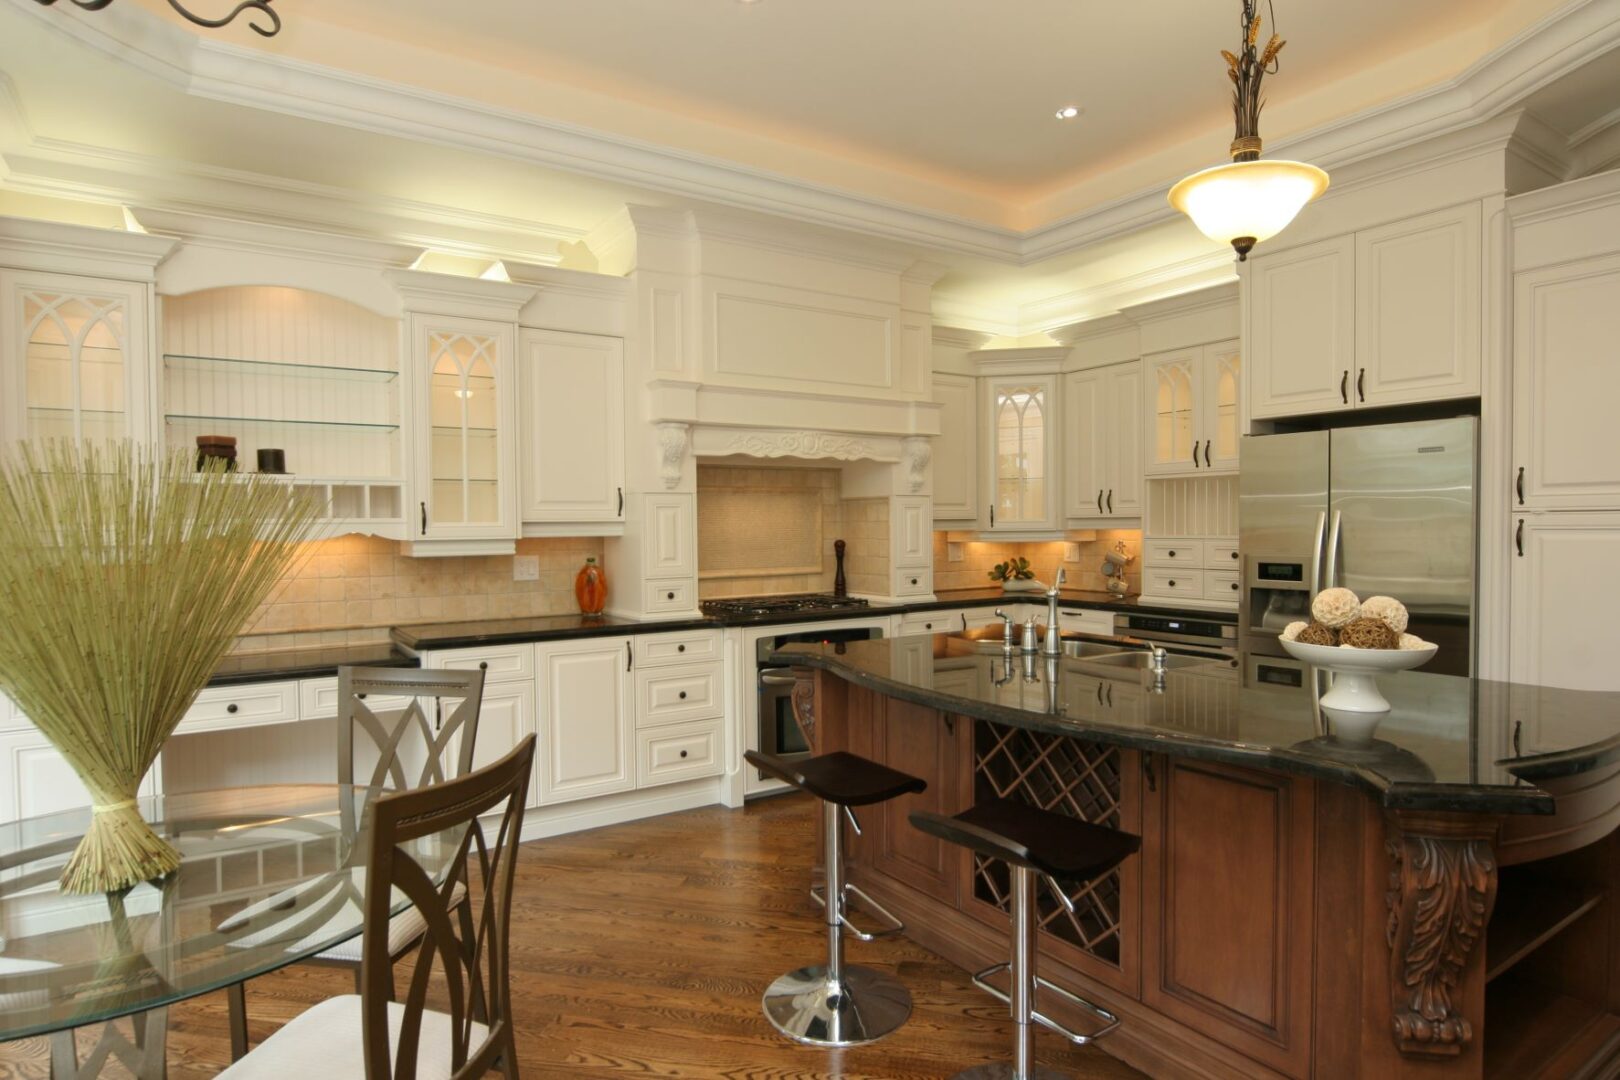 A Kitchen Island With Revolving Bar Stools